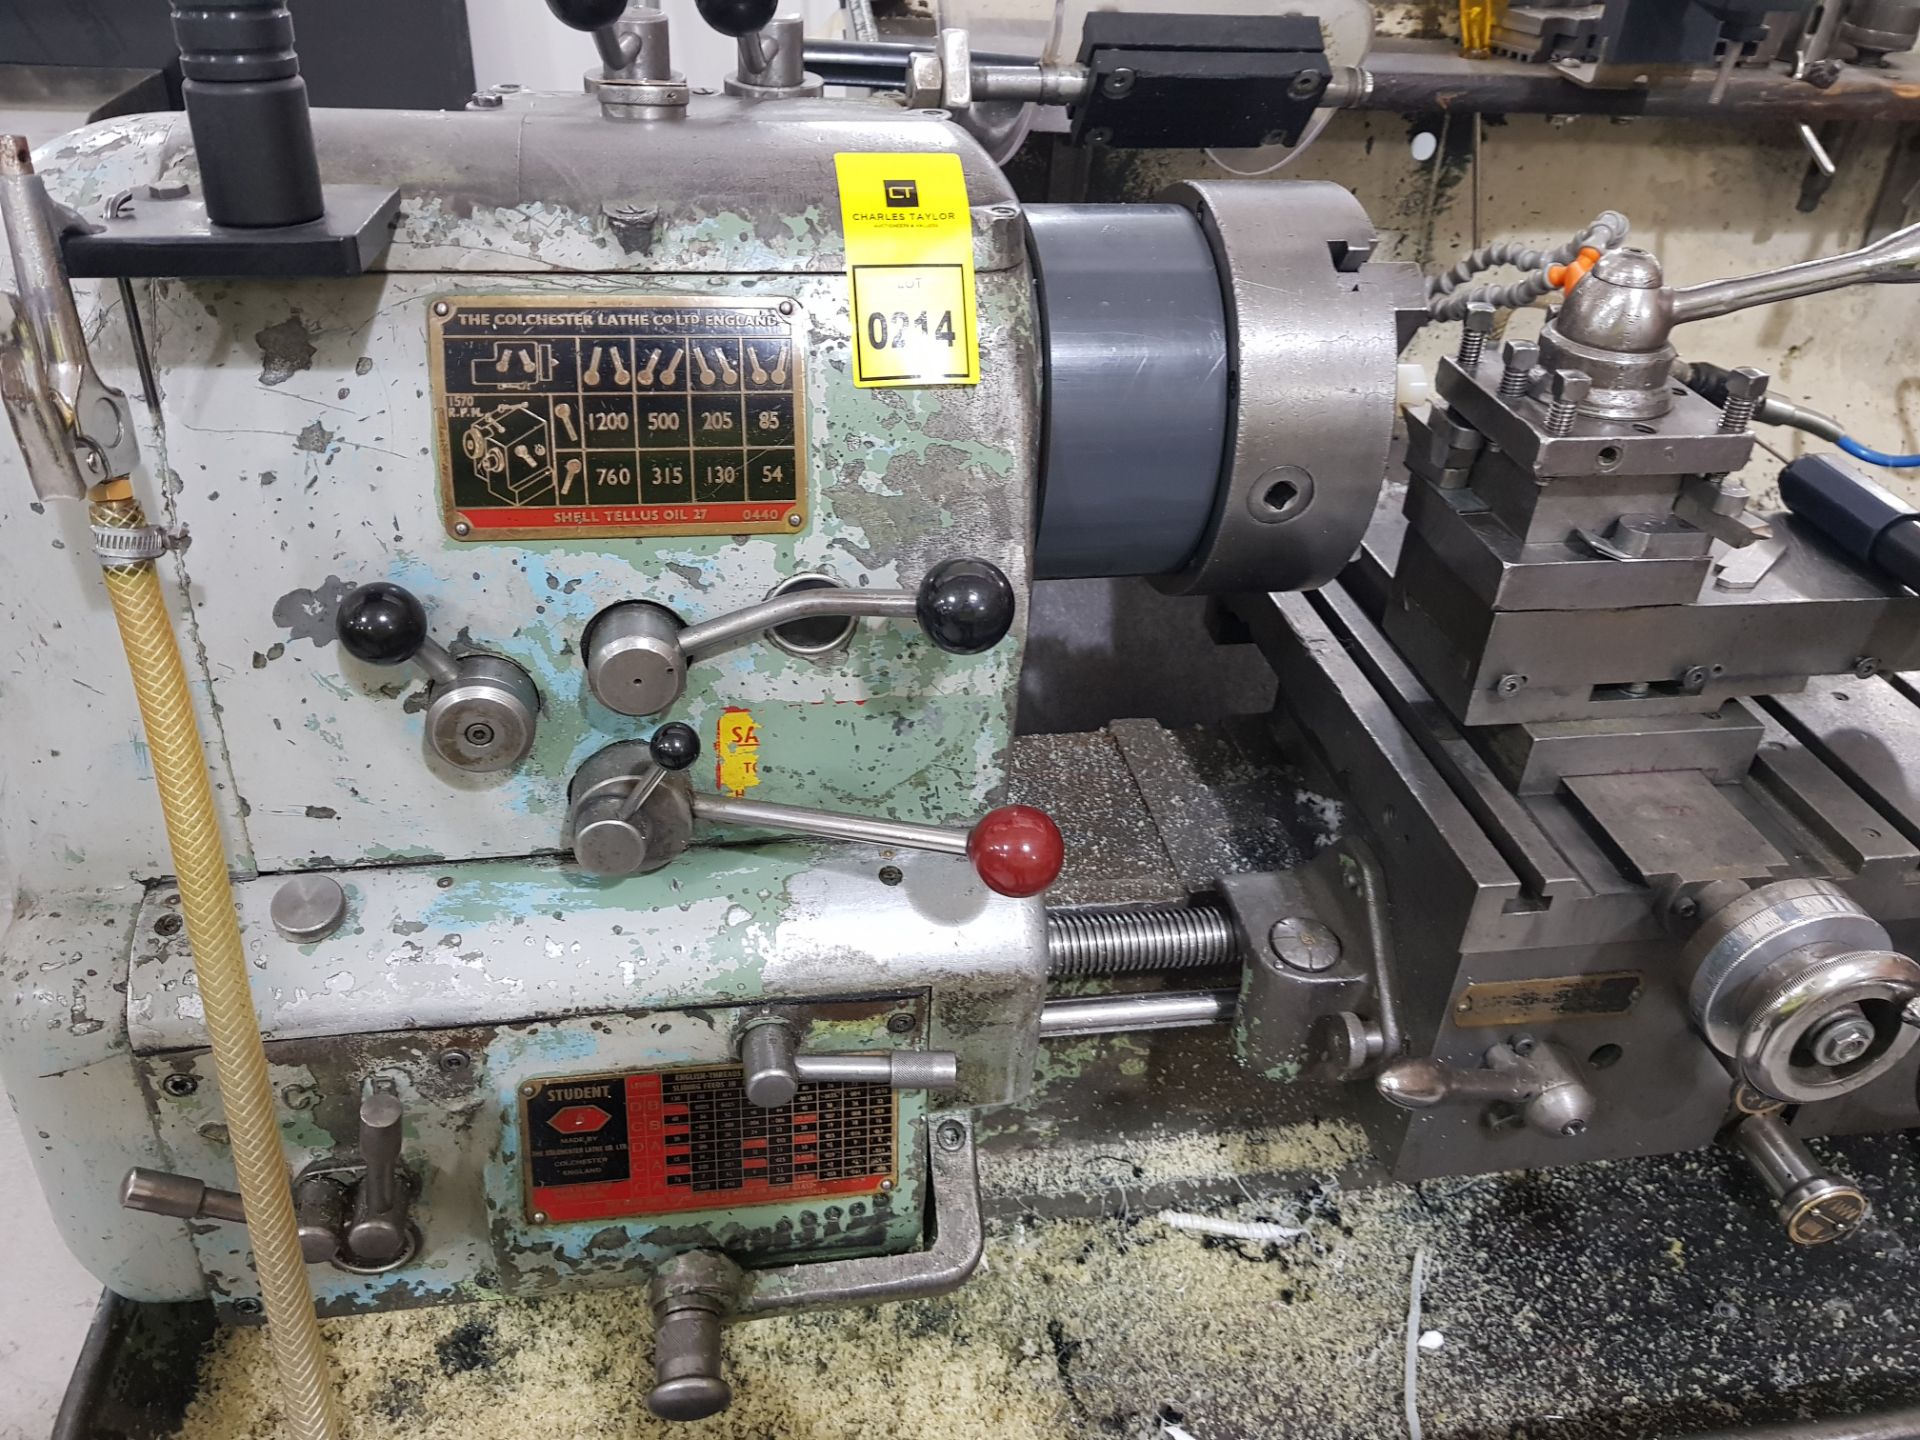 COLCHESTER STUDENT LATHE 6.5'' CENTRE HEIGHT AND 24' INCH BED LENGTH (ASSETS LOCATED IN DENTON, - Image 4 of 6